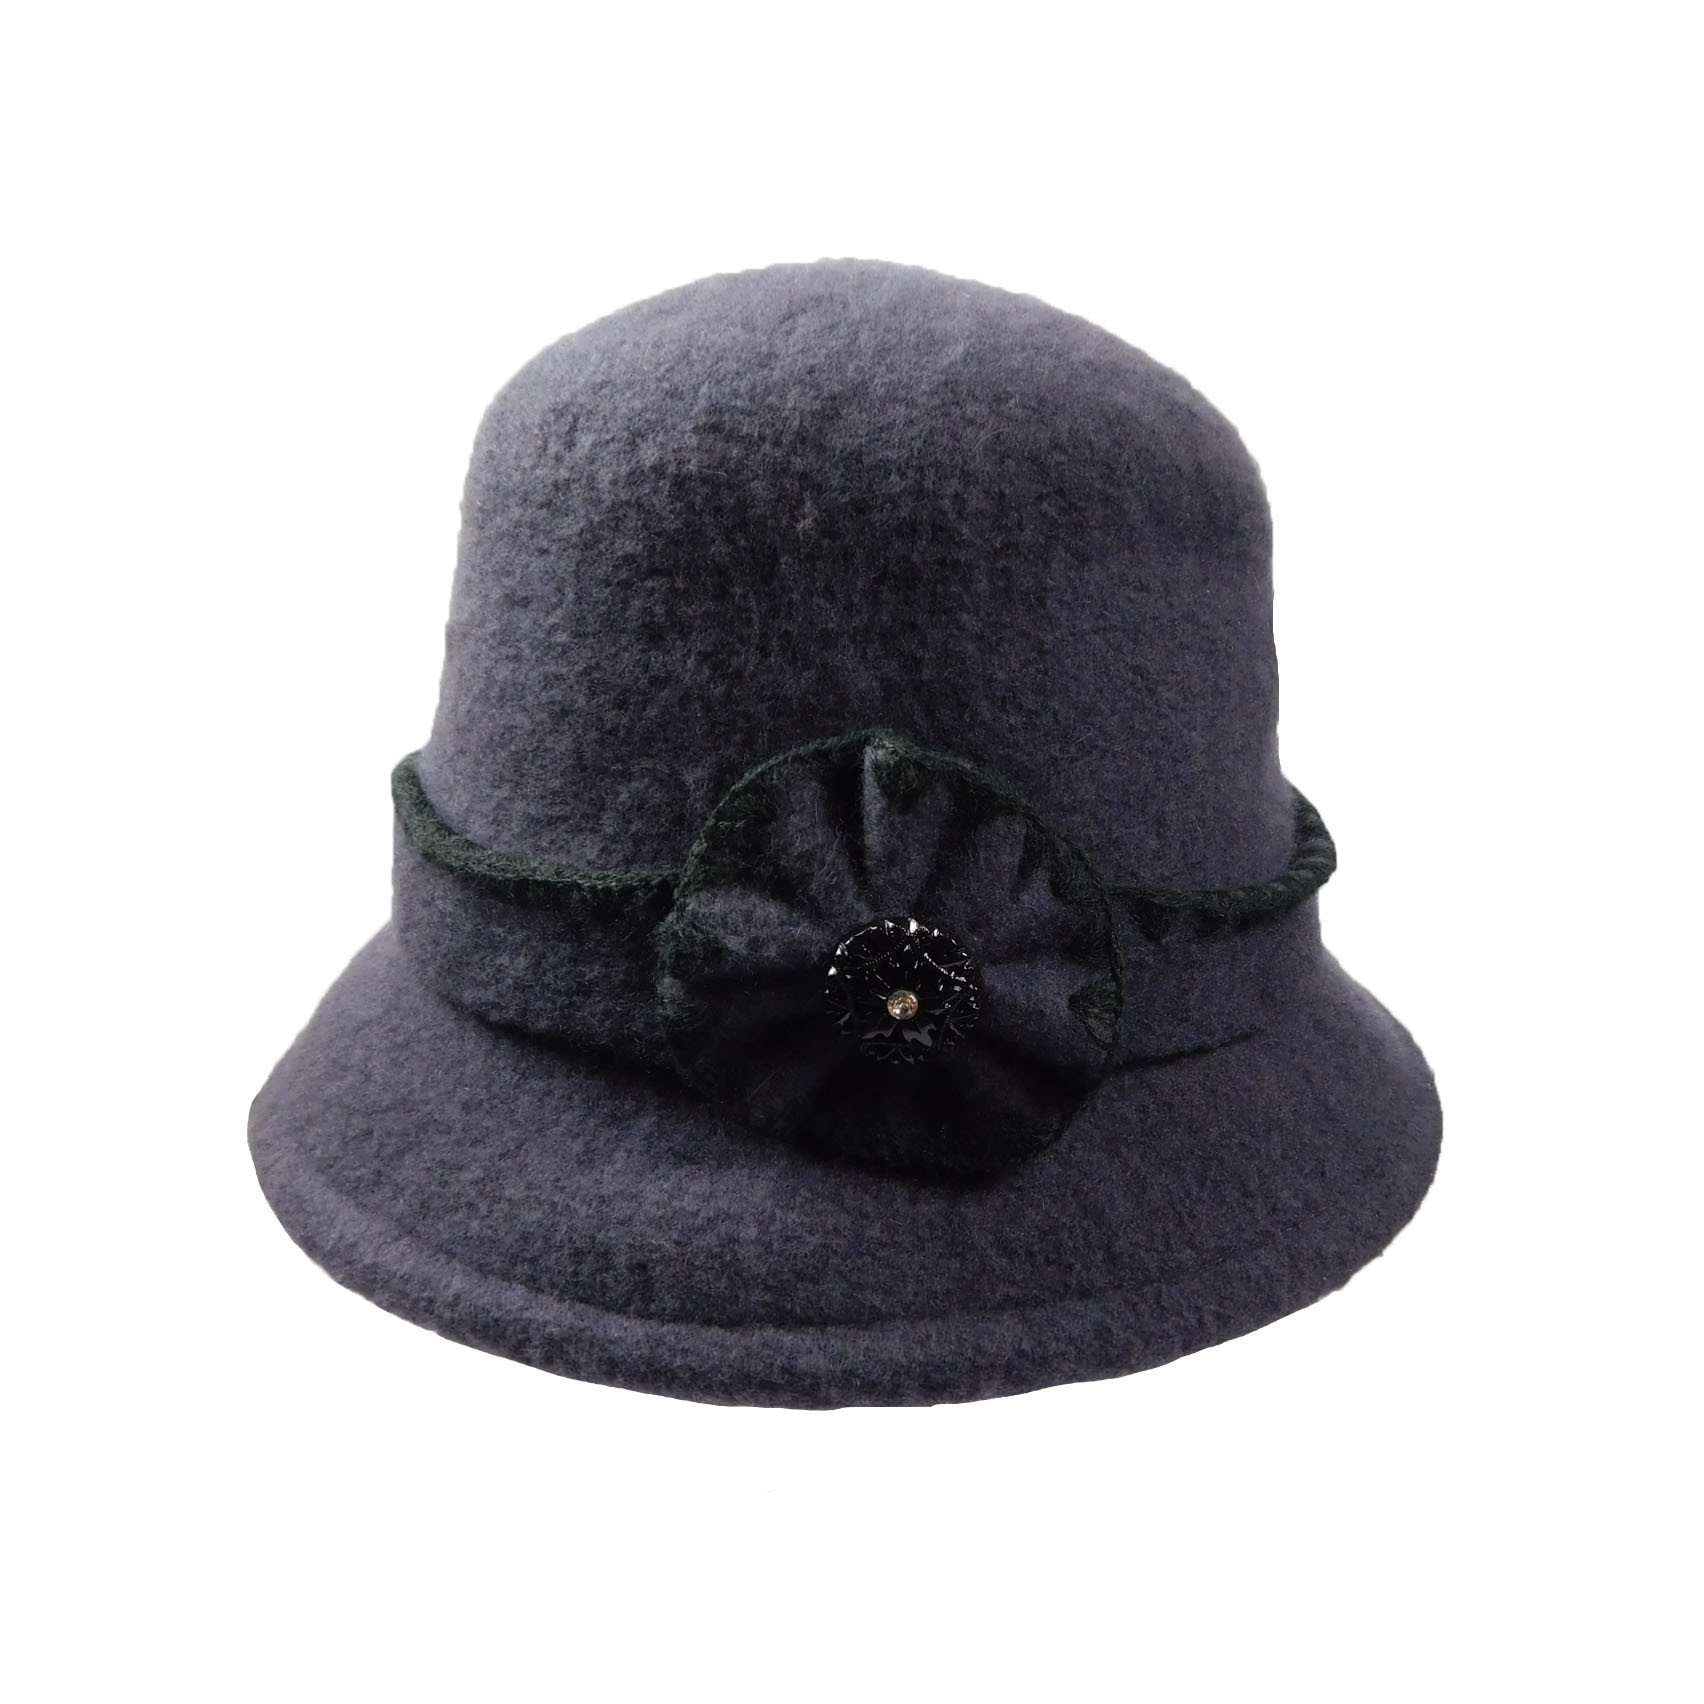 Boiled Wool Bucket Hat with Flower and Rhinestone Button, Bucket Hat - SetarTrading Hats 